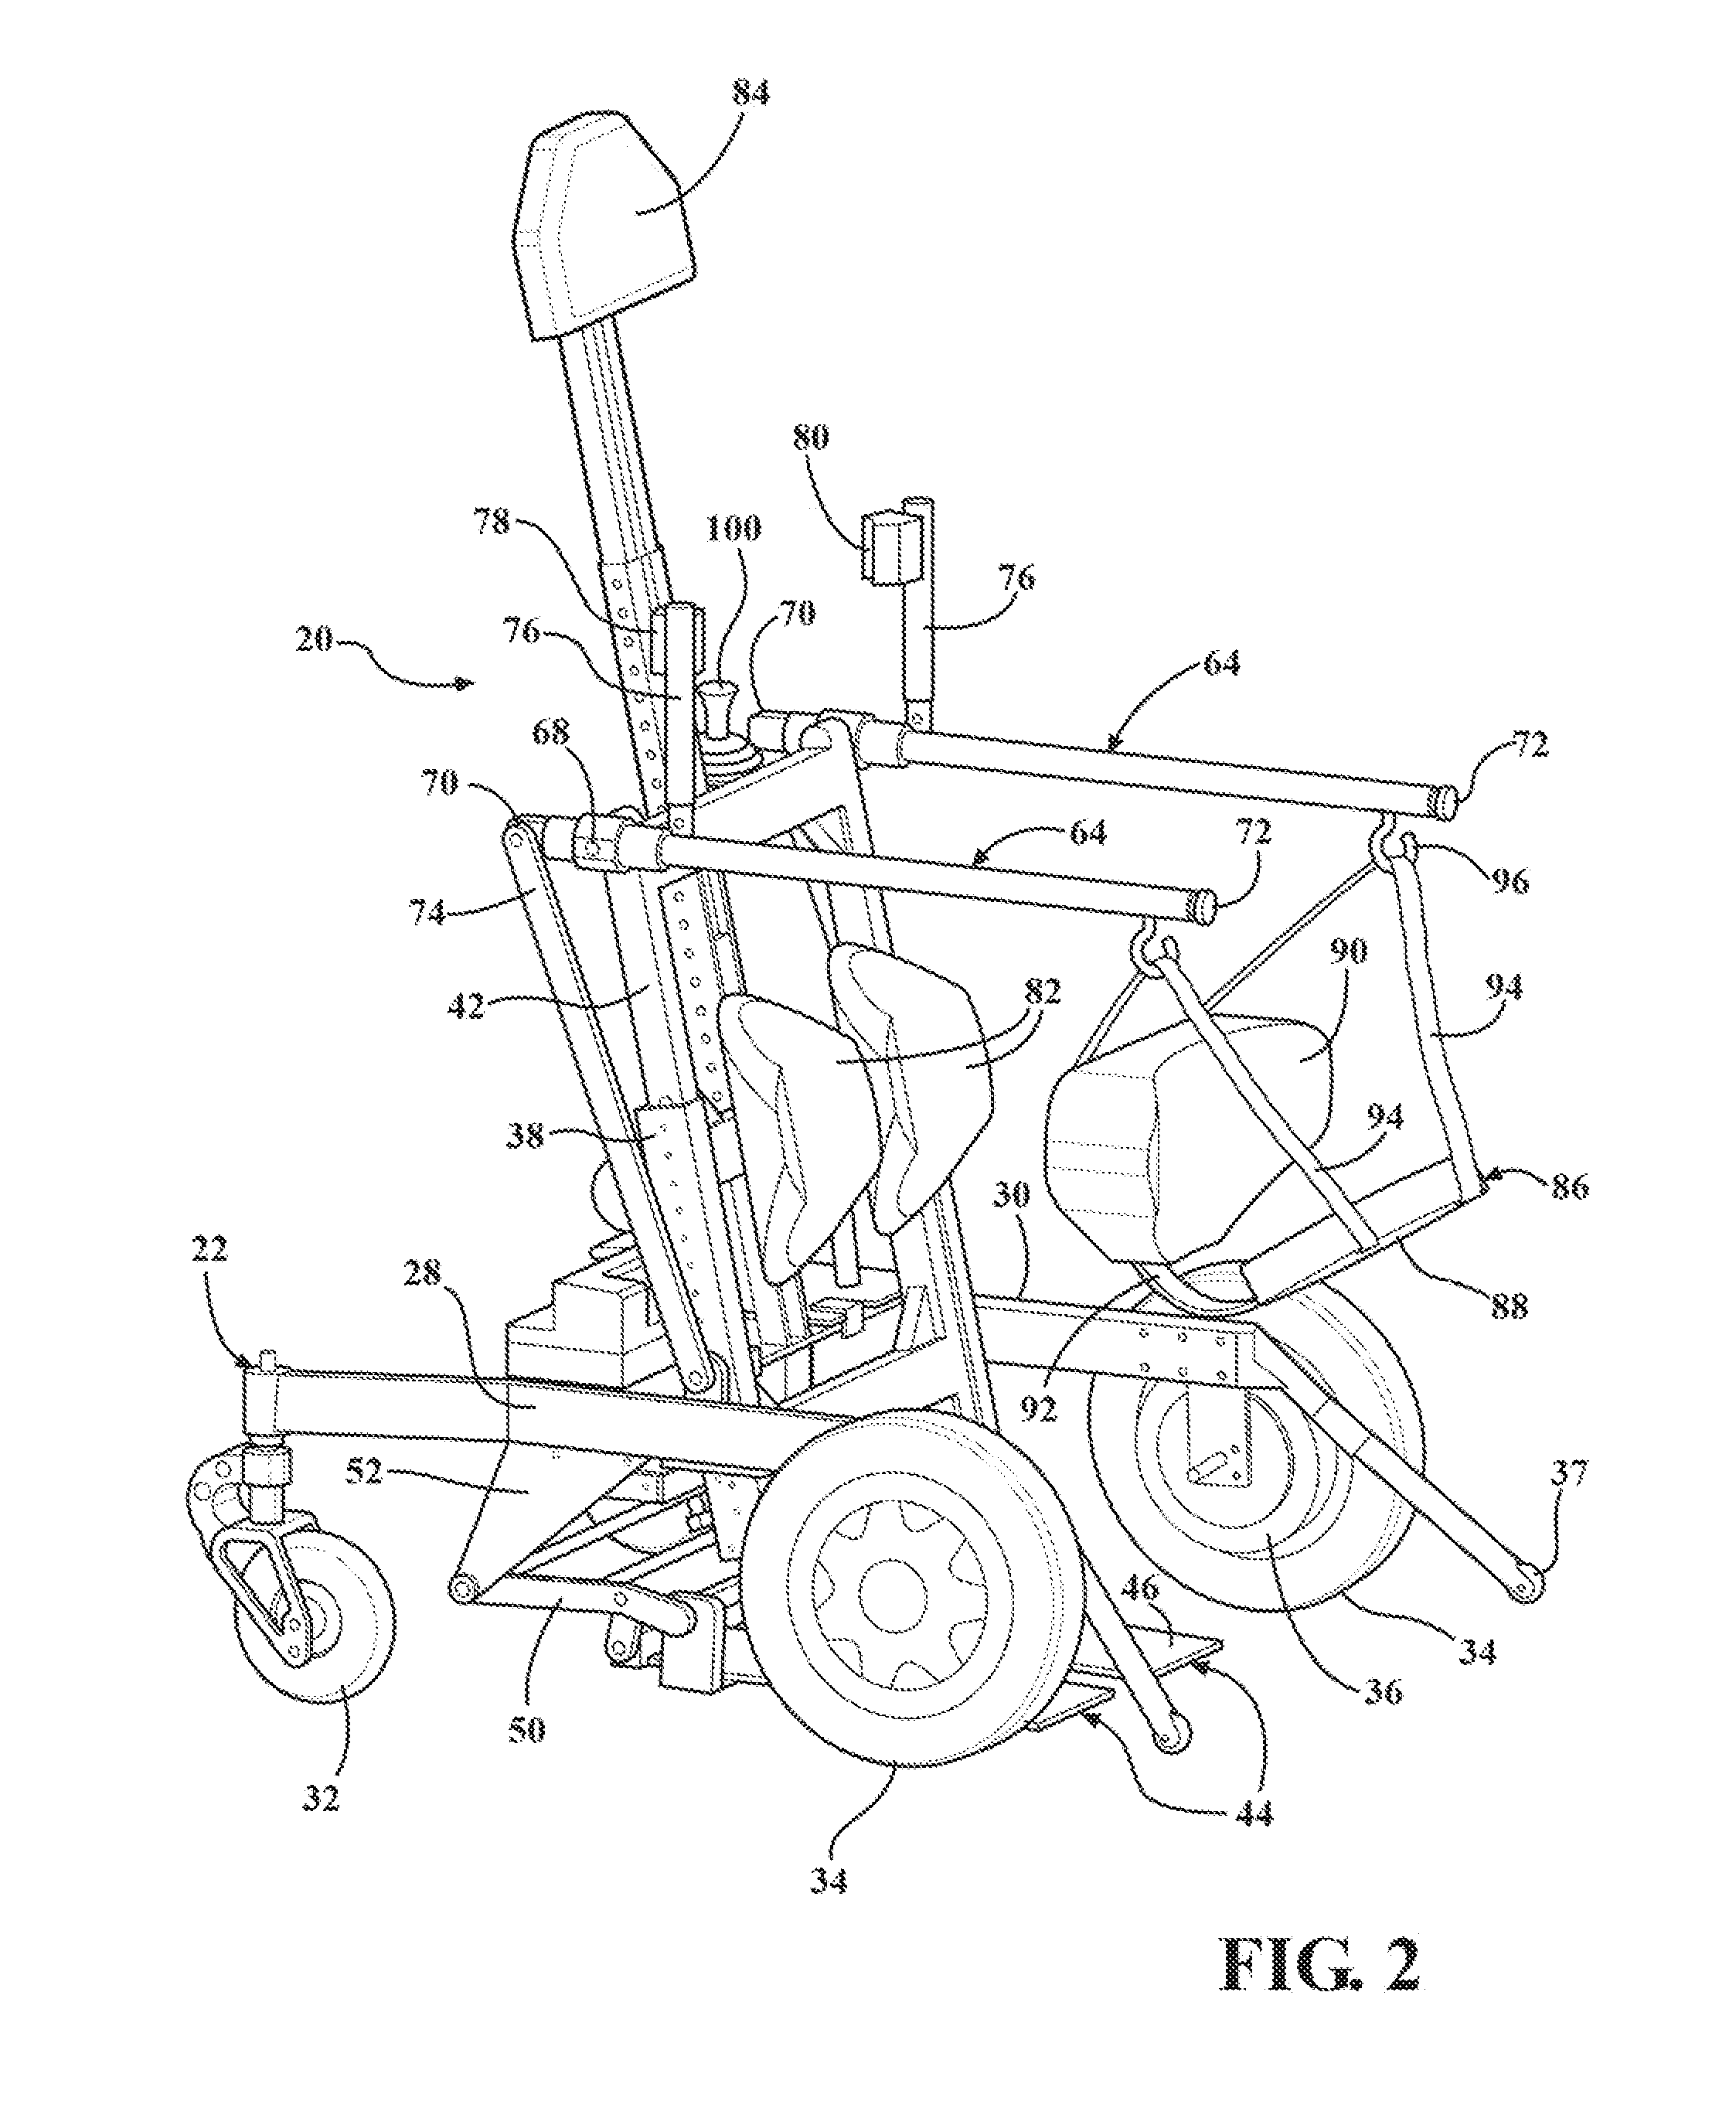 Standing mobility and/or transfer device